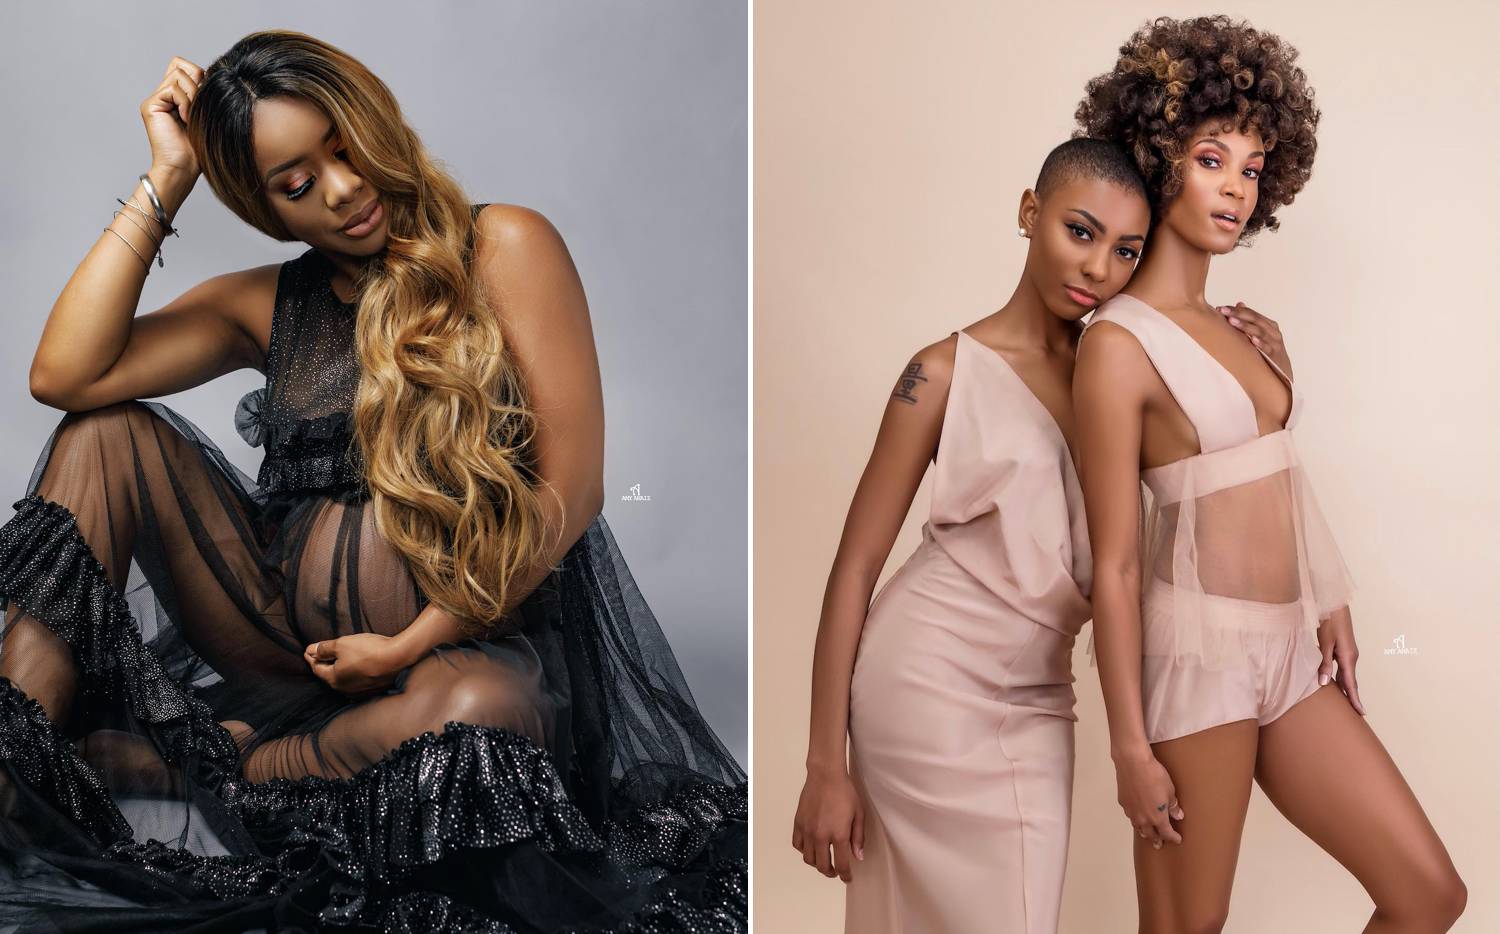 Amy Anaiz's photos depict a pregnant Black woman in a gray studio wearing a sheer black gown; then a photograph of two slim Black models wearing pink lingerie against a tan backdrop.